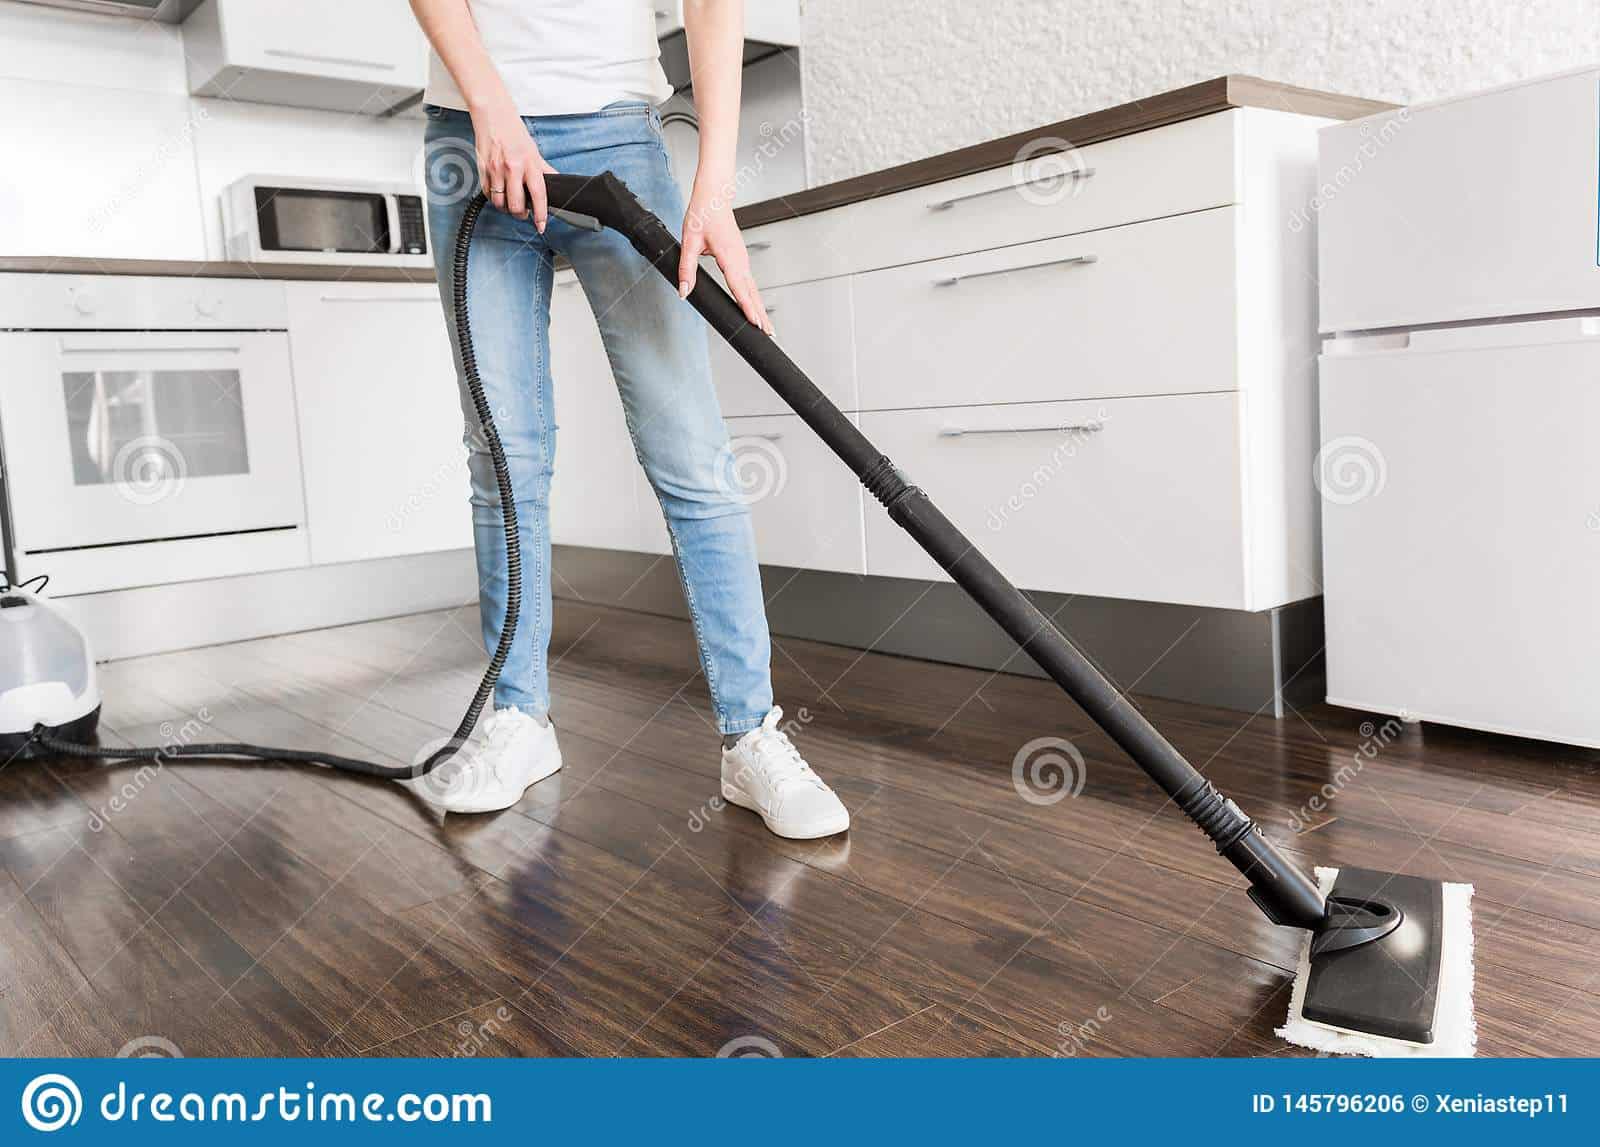 professional home cleaning service woman washes floor steam mop 145796206